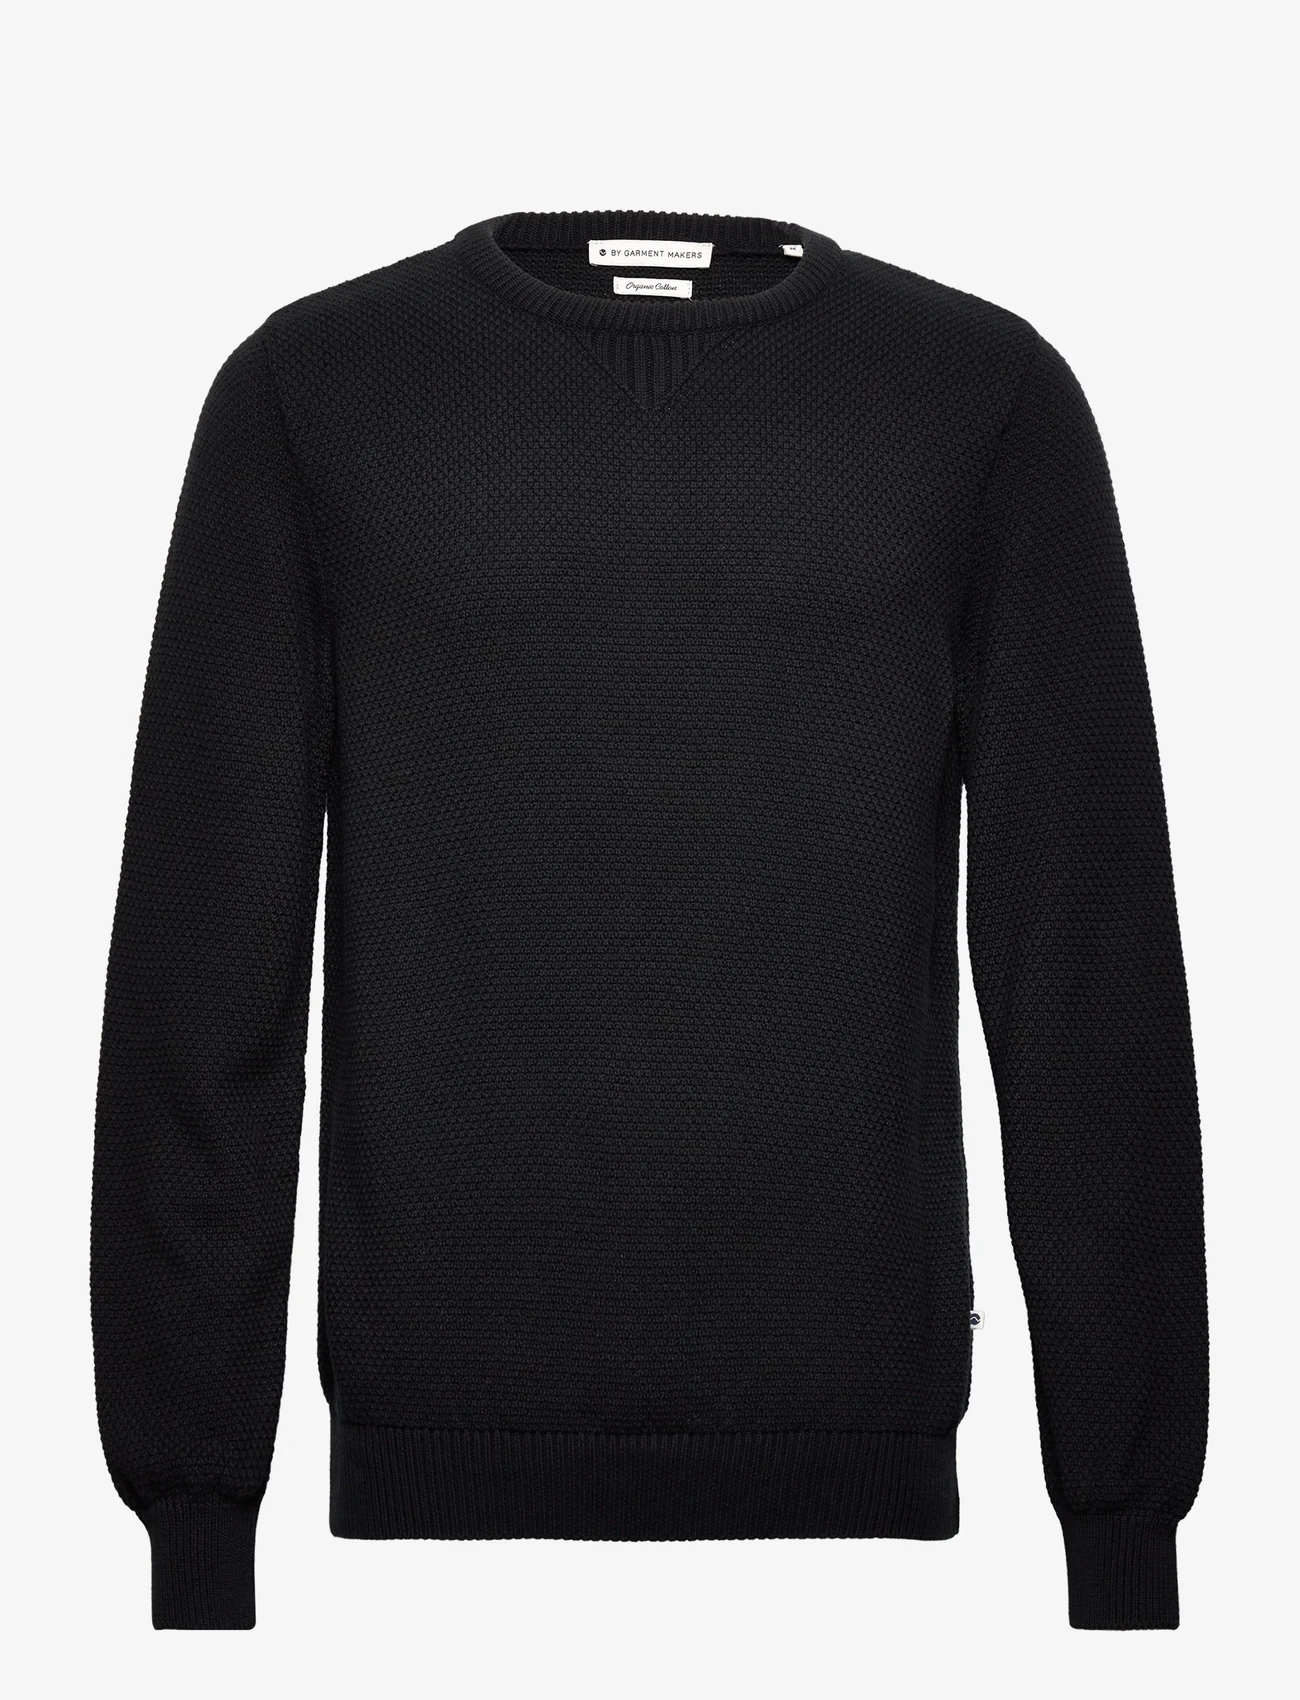 By Garment Makers - The Organic Waffle knit - knitted round necks - jet black - 0